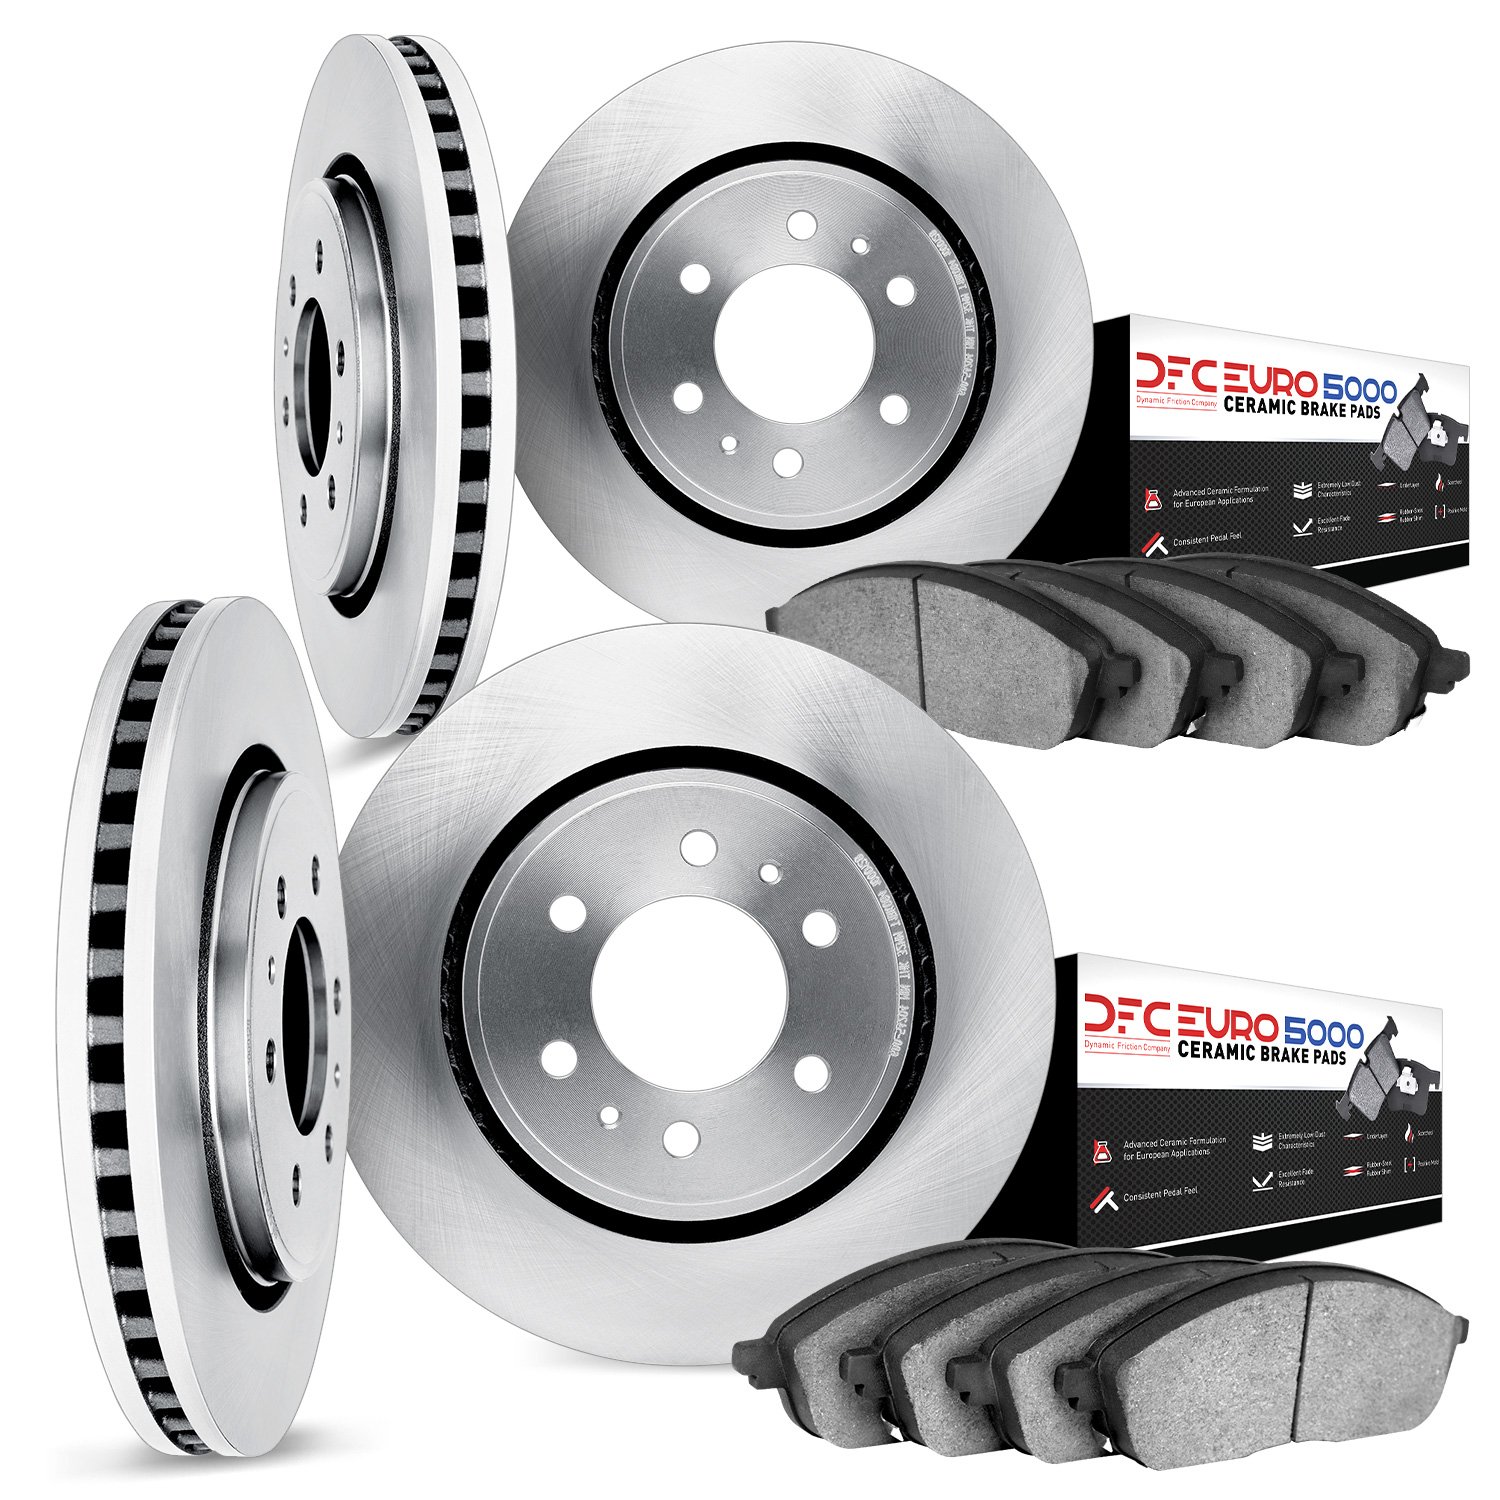 6604-10650 Brake Rotors w/5000 Euro Ceramic Brake Pads, 2002-2005 GM, Position: Front and Rear